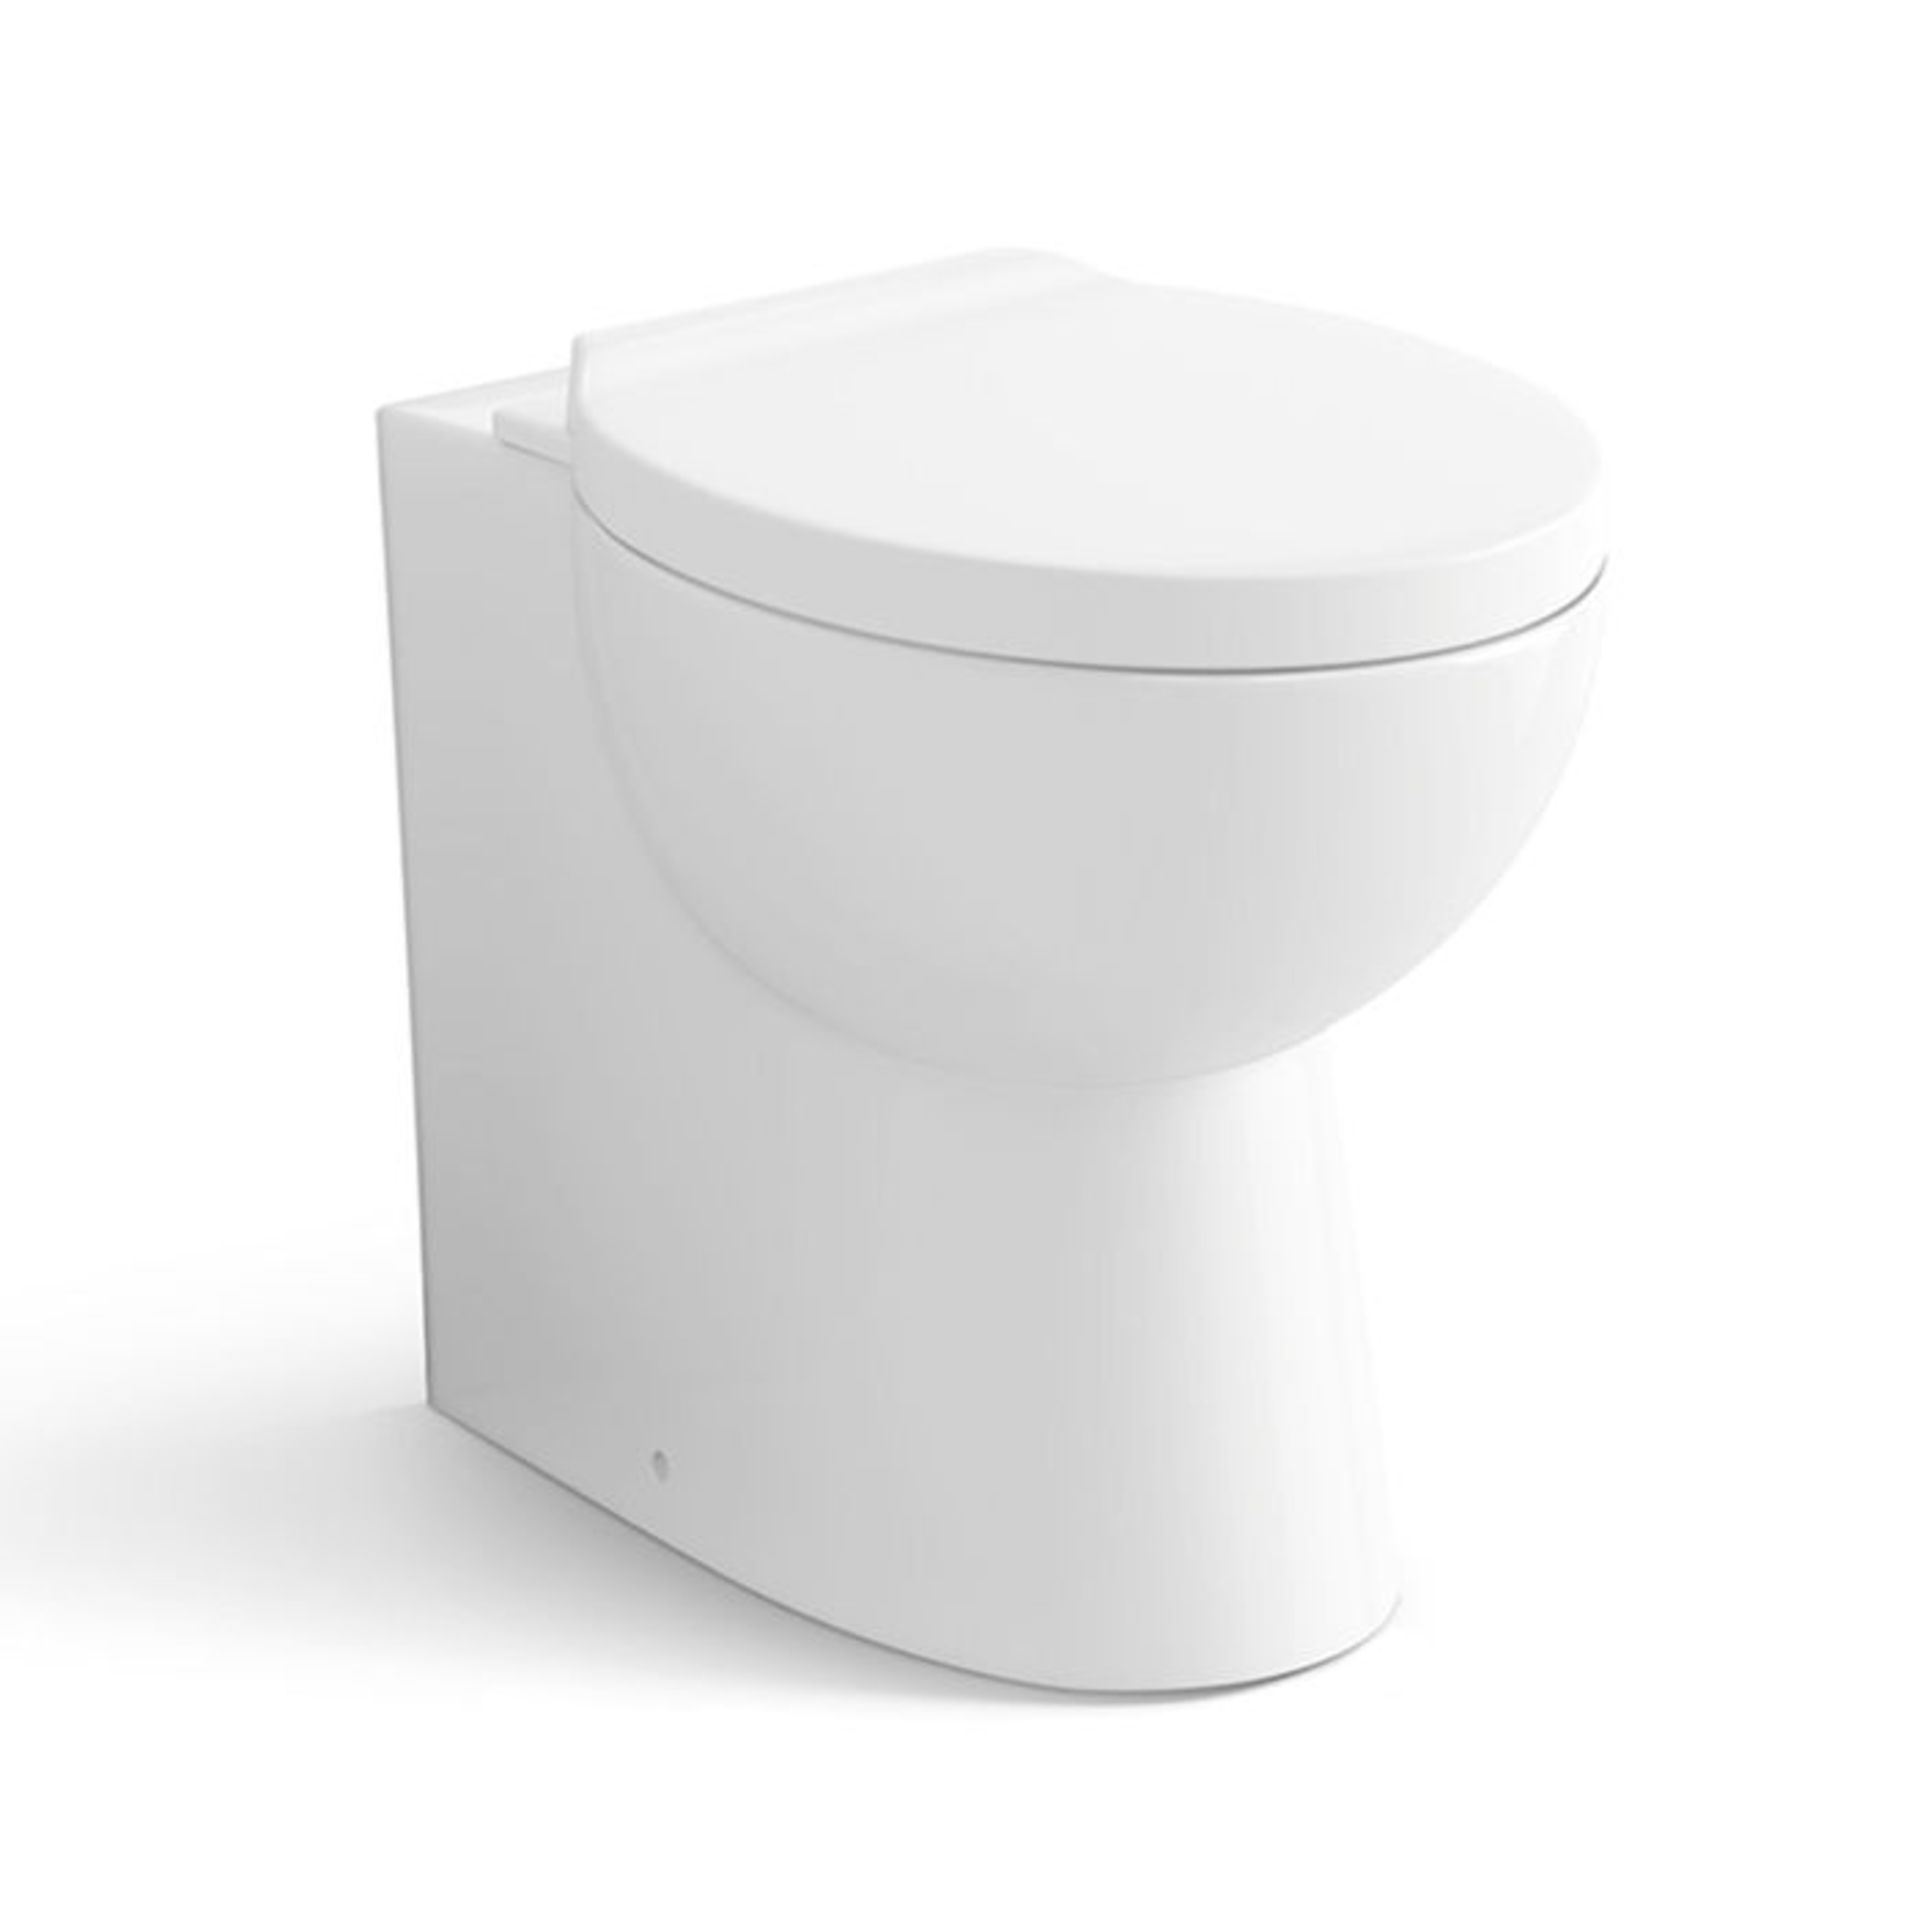 Quartz Back to Wall Toilet & Soft Close Seat. Made from White Vitreous China Finished in a